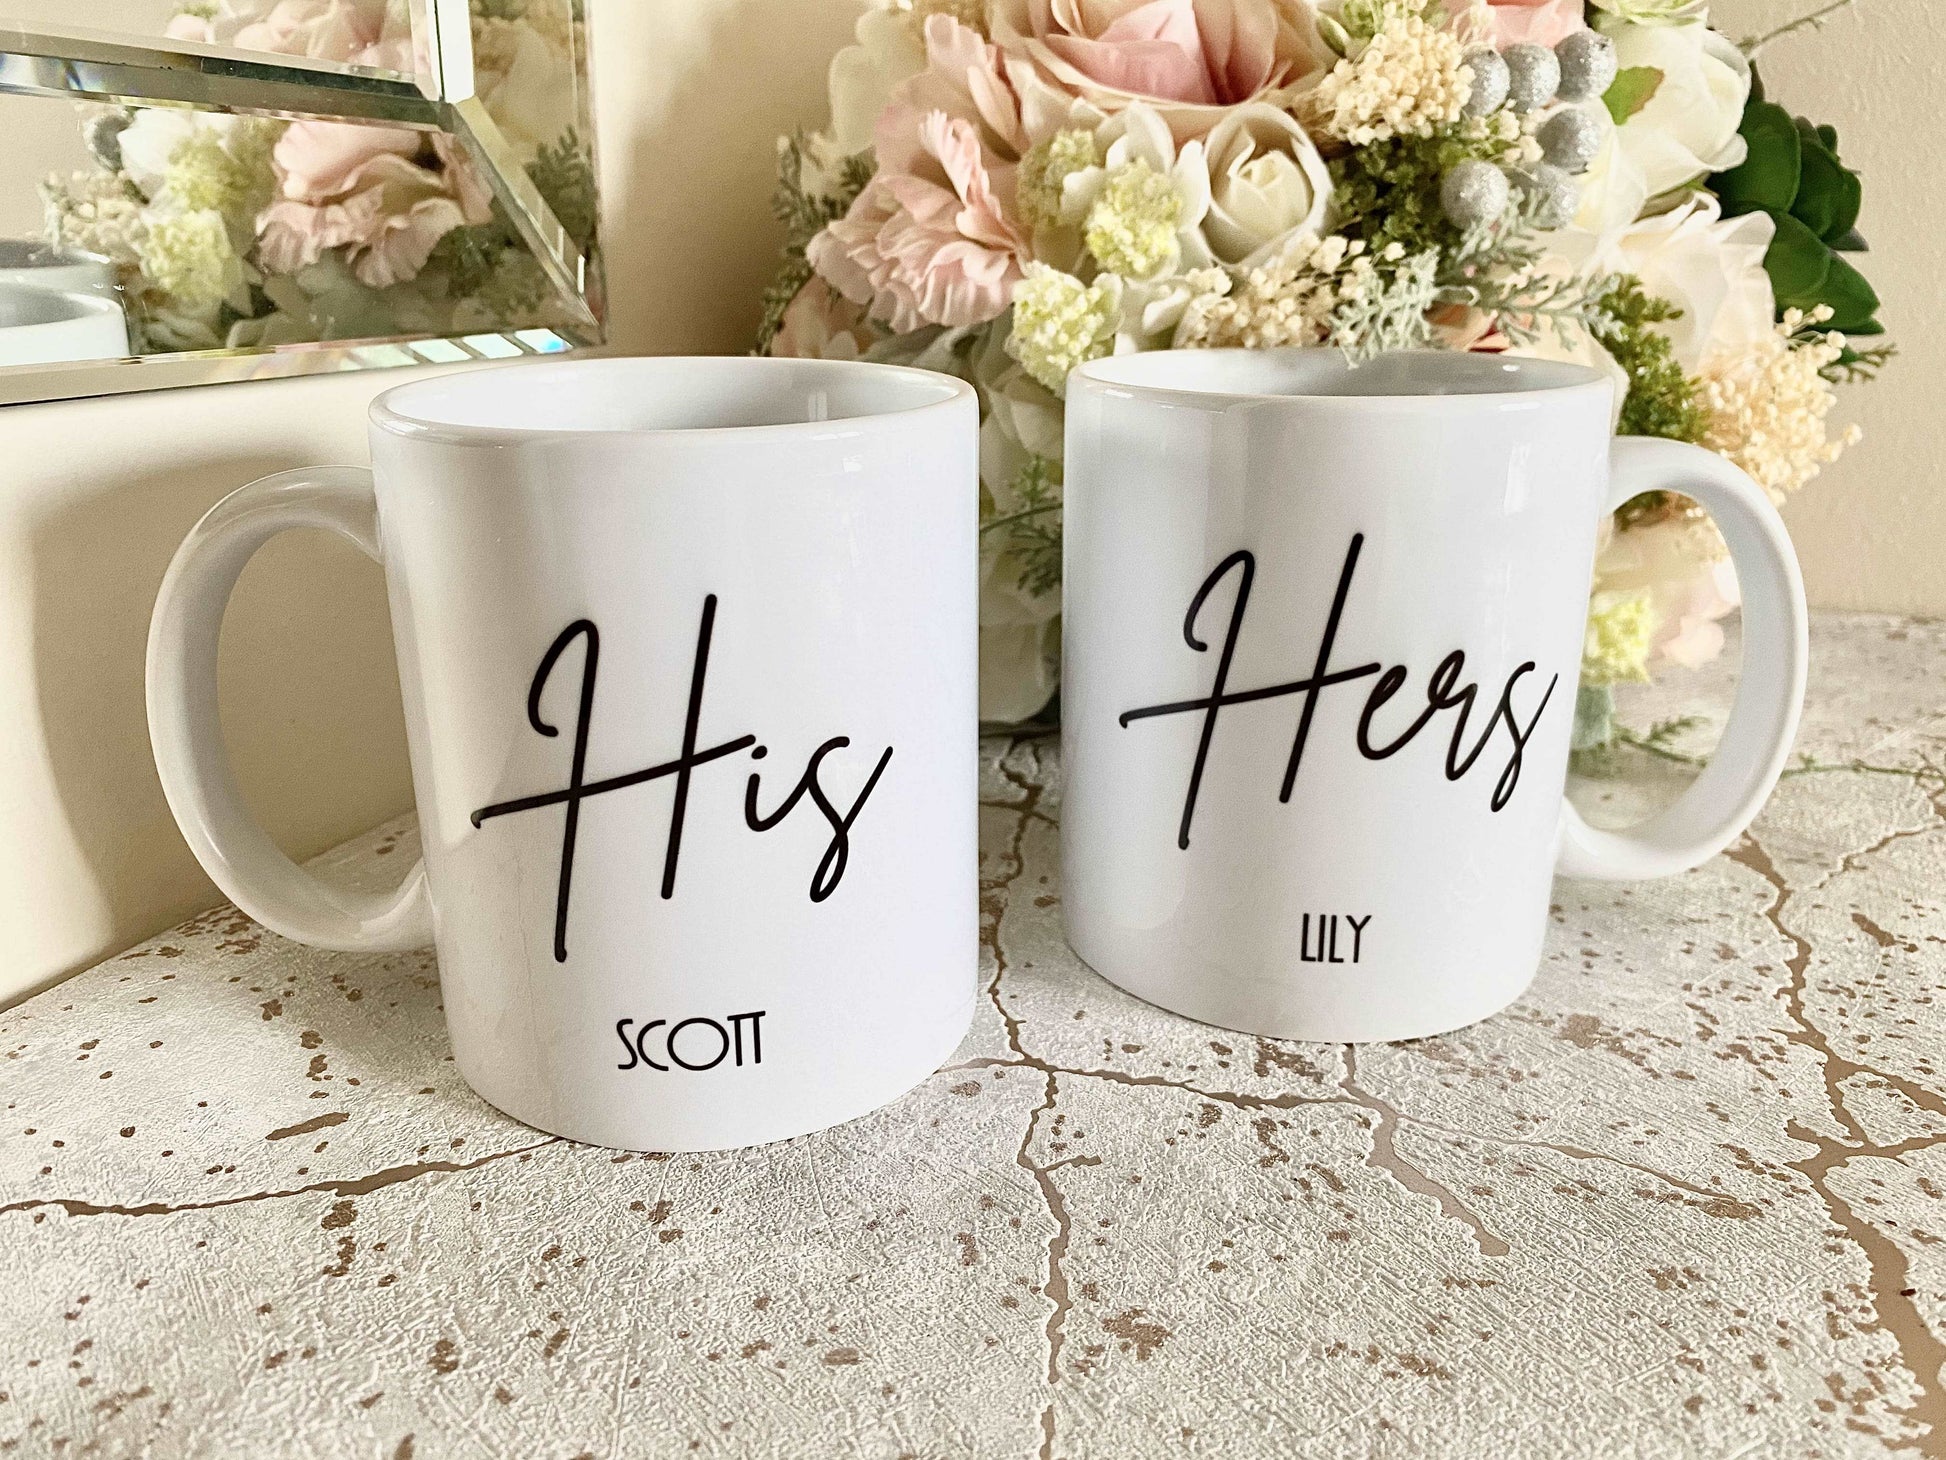 set of two white mugs. One has the text His in a script font with a name below and the other has Hers with a name below.